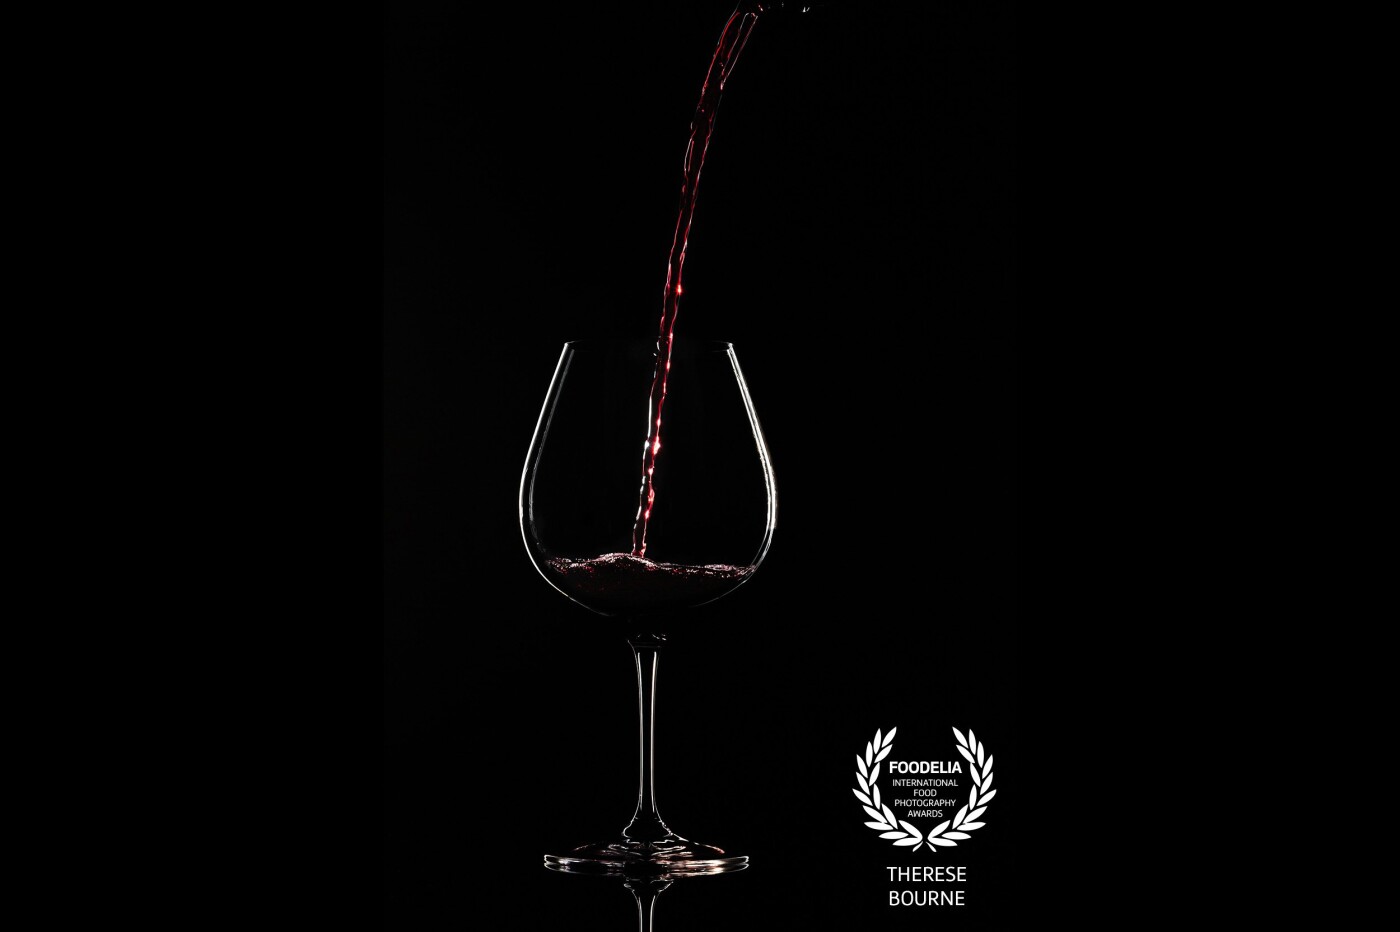 I created this image for a drinks photography challenge. I've always been fascinated by this type of lighting, and it was a real challenge working out how to light the different parts of the wine and the glass, whilst keeping the background dark.